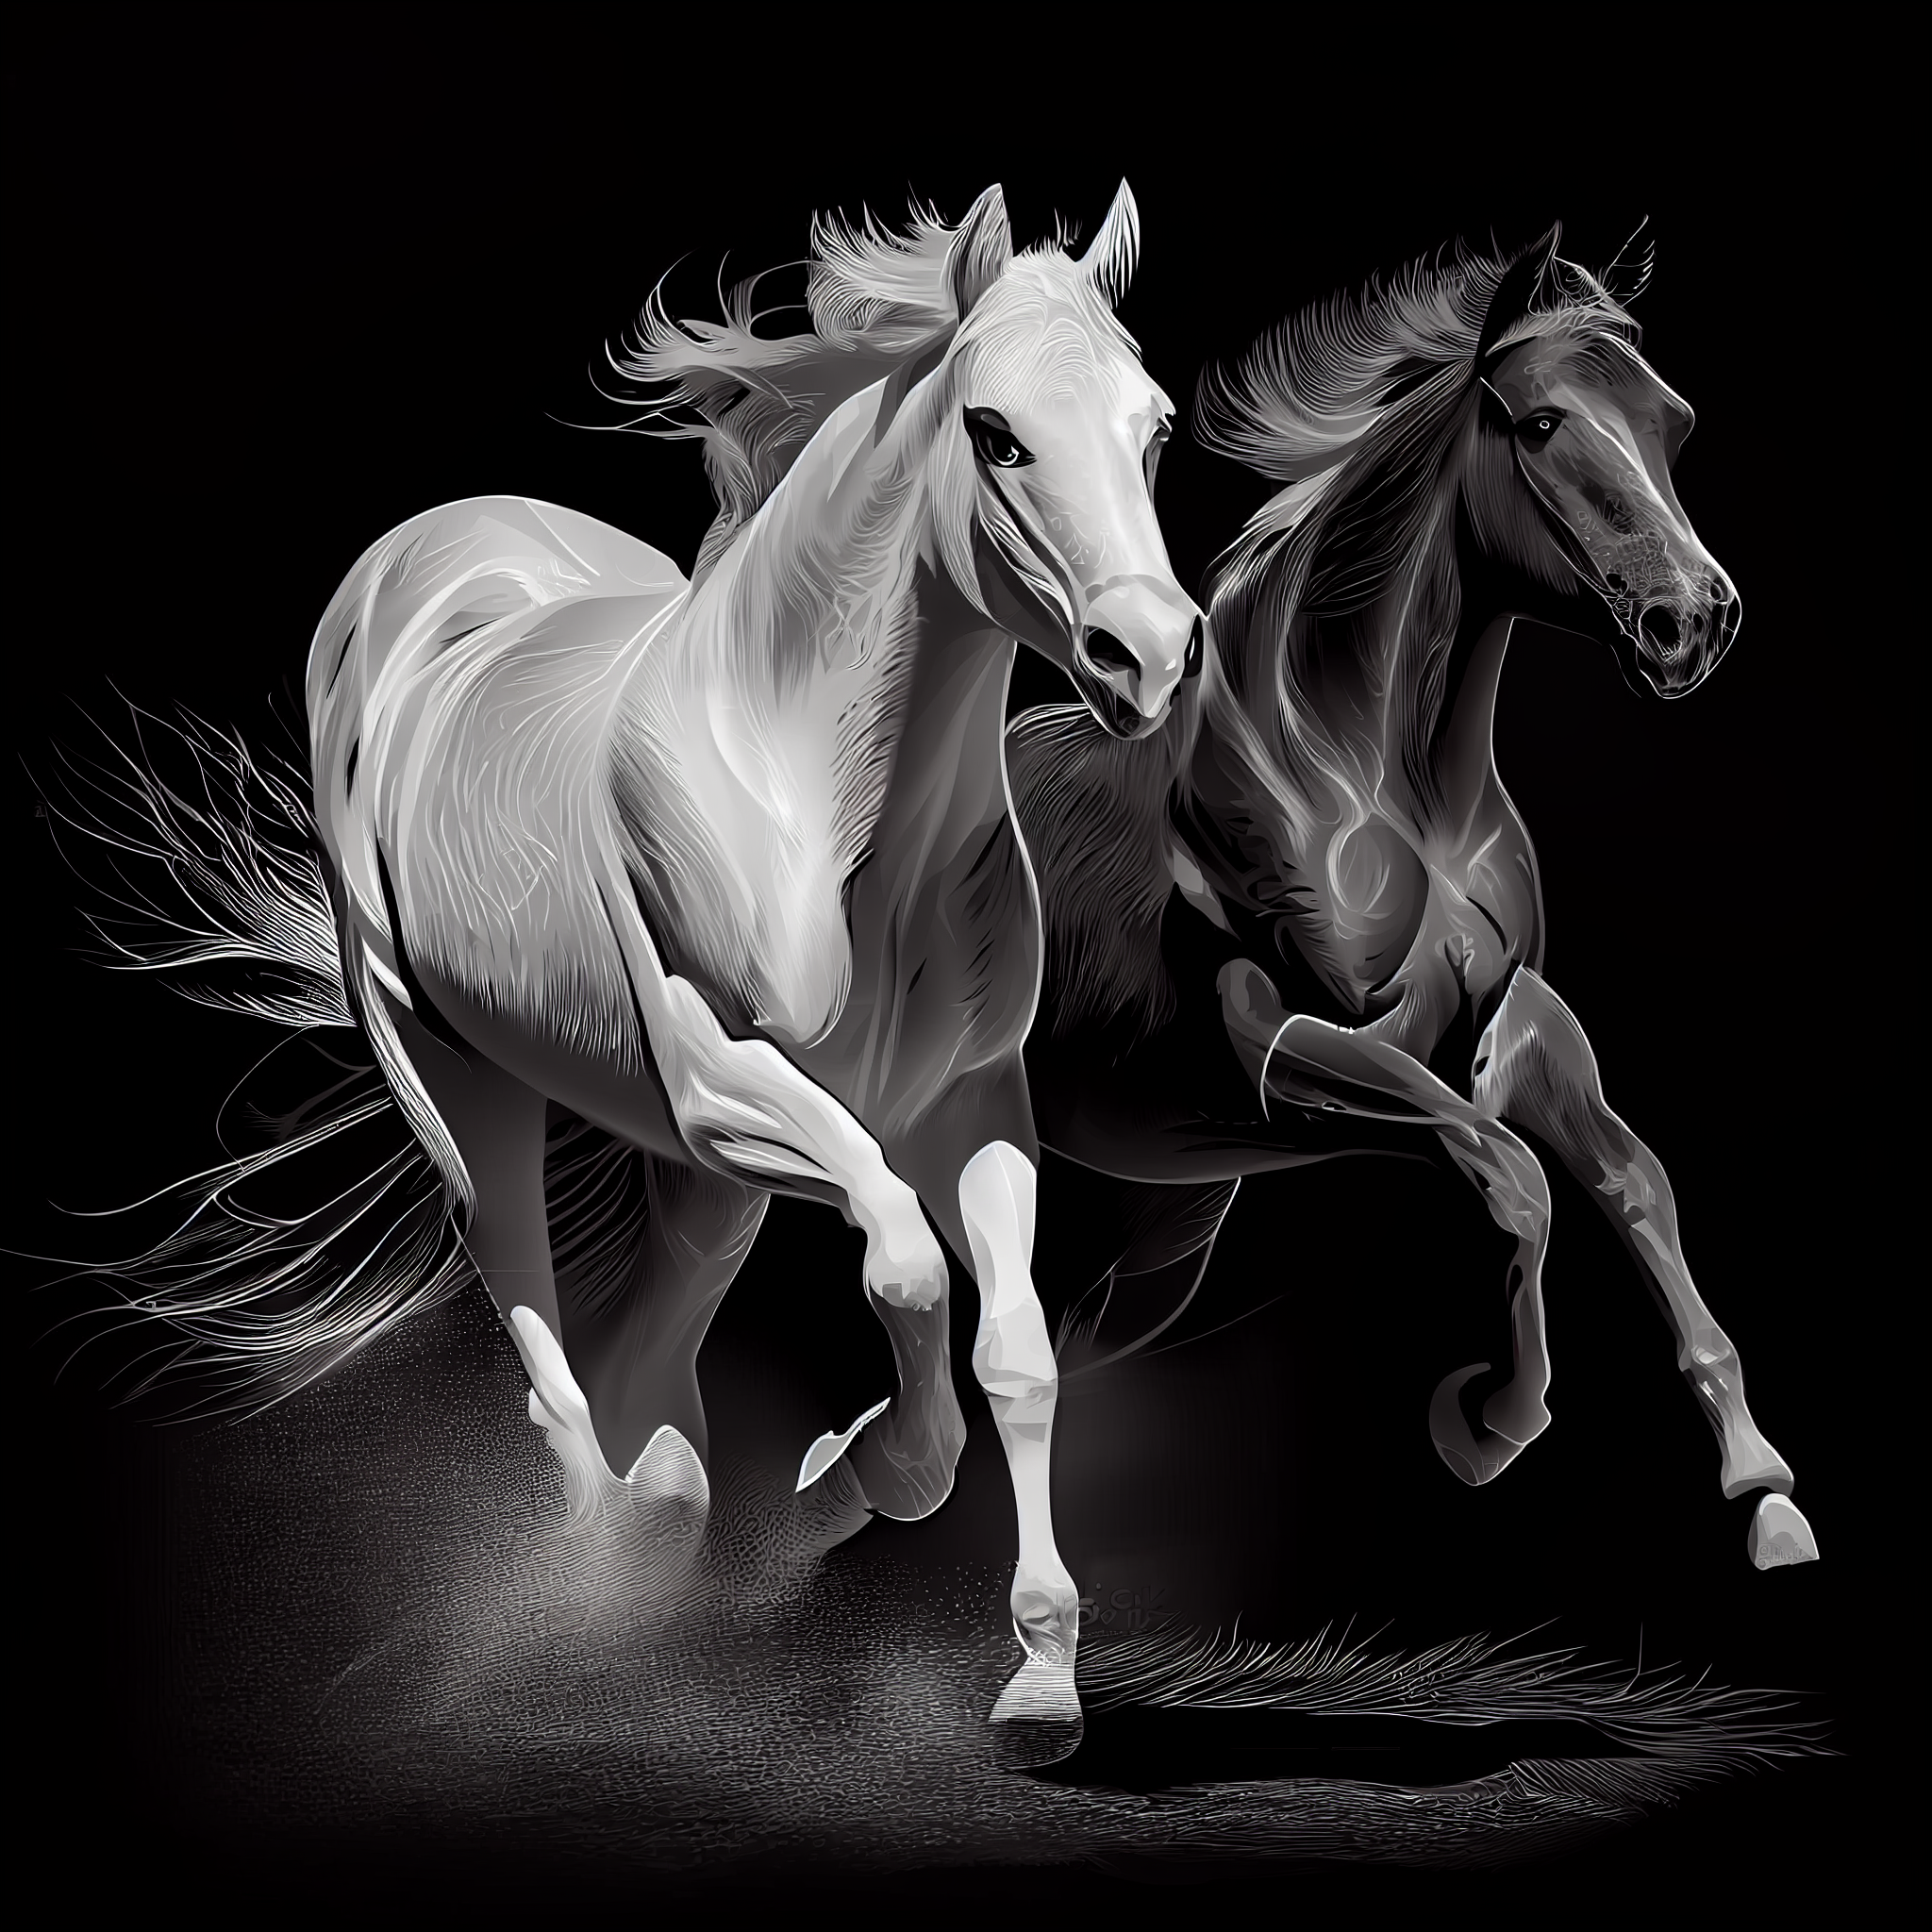 Gallop of Grace: A Stunning White Charcoal Vector Art Print of Two Horses Running on a Black Background